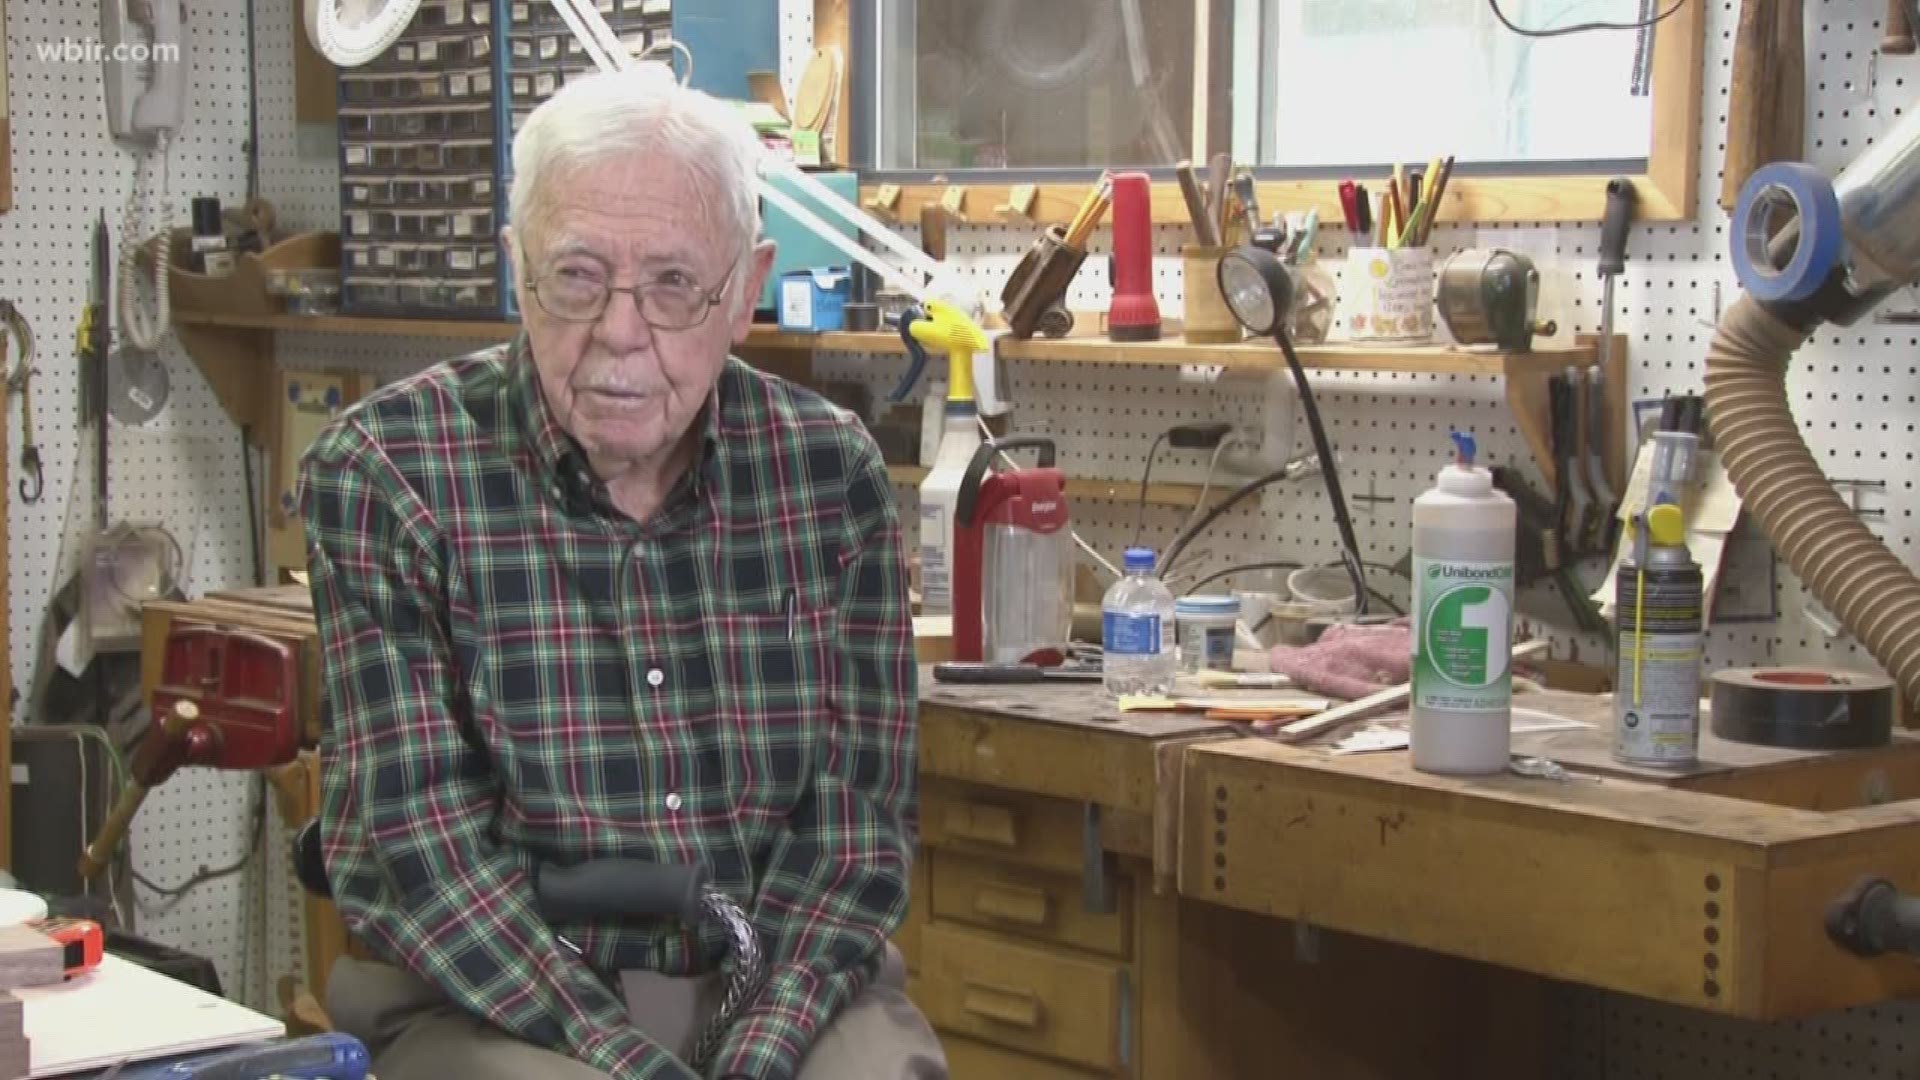 Al Hudson has grown up around woodworking tools. He's about to turn 100 years old and shows no sign of stopping. Al says woodworking has kept him young and busy.   May 7, 2019-4pm